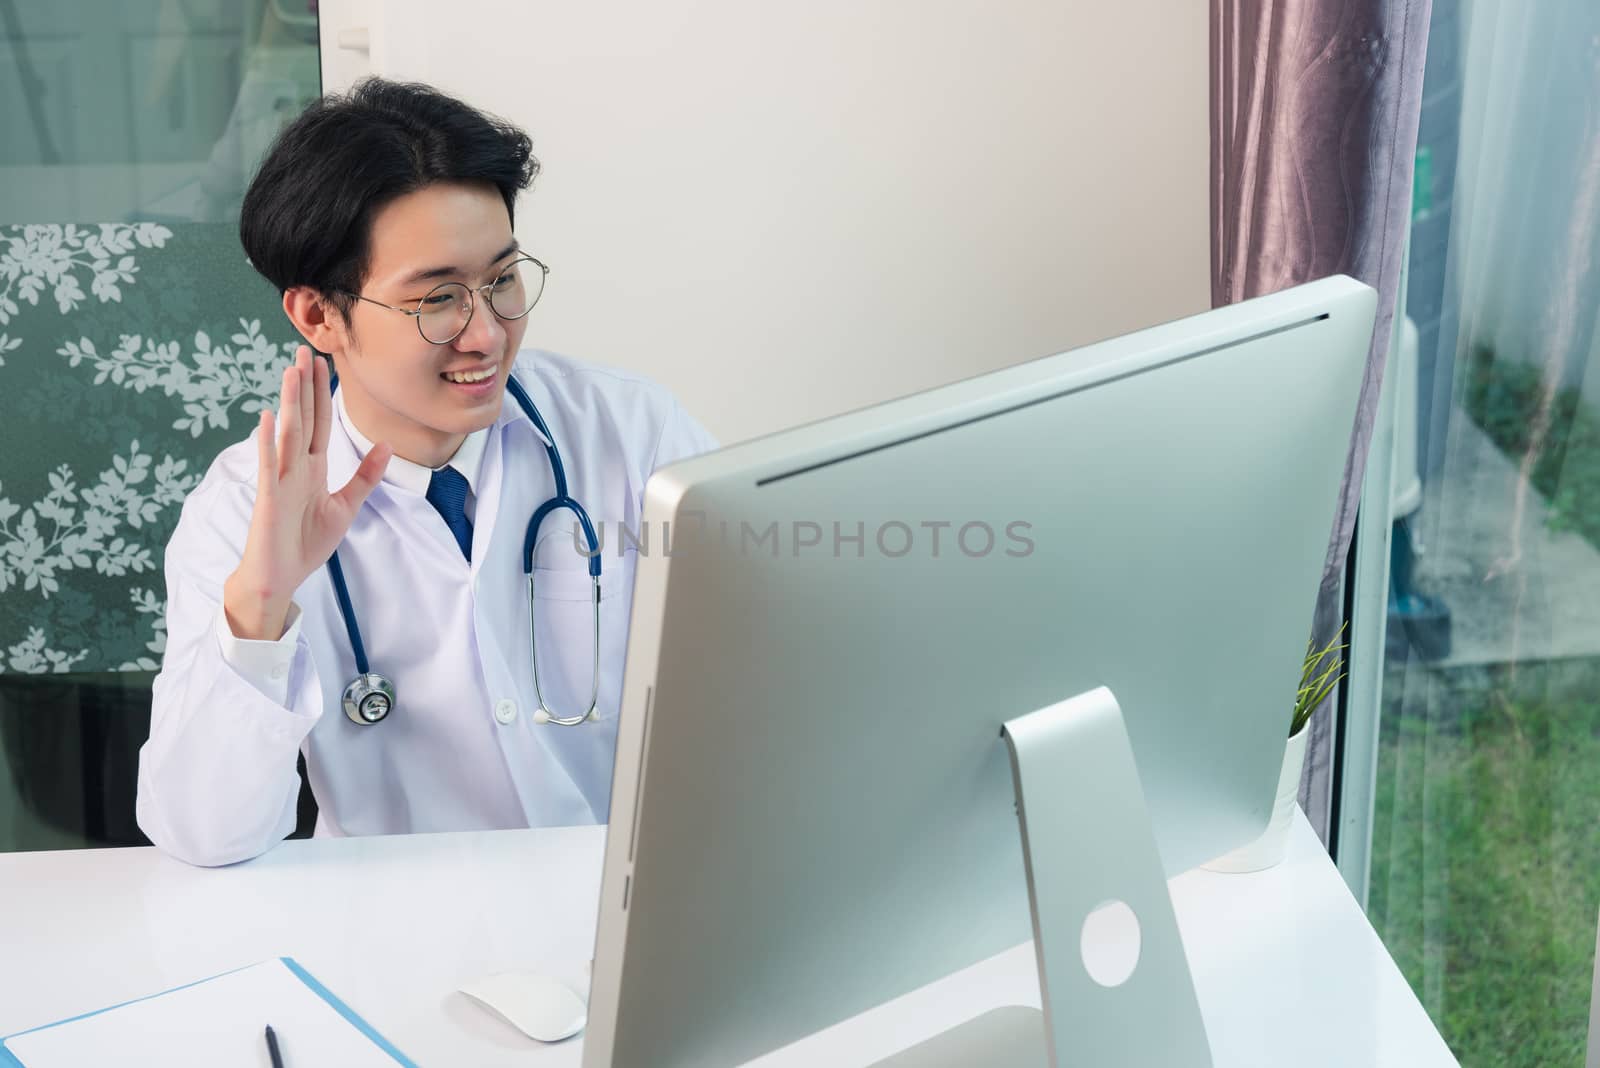 Asian young handsome doctor man wearing a doctor's dress and stethoscope video conference call or facetime raise hand say hello to patient he smiling on desk at hospital office, Health medical care